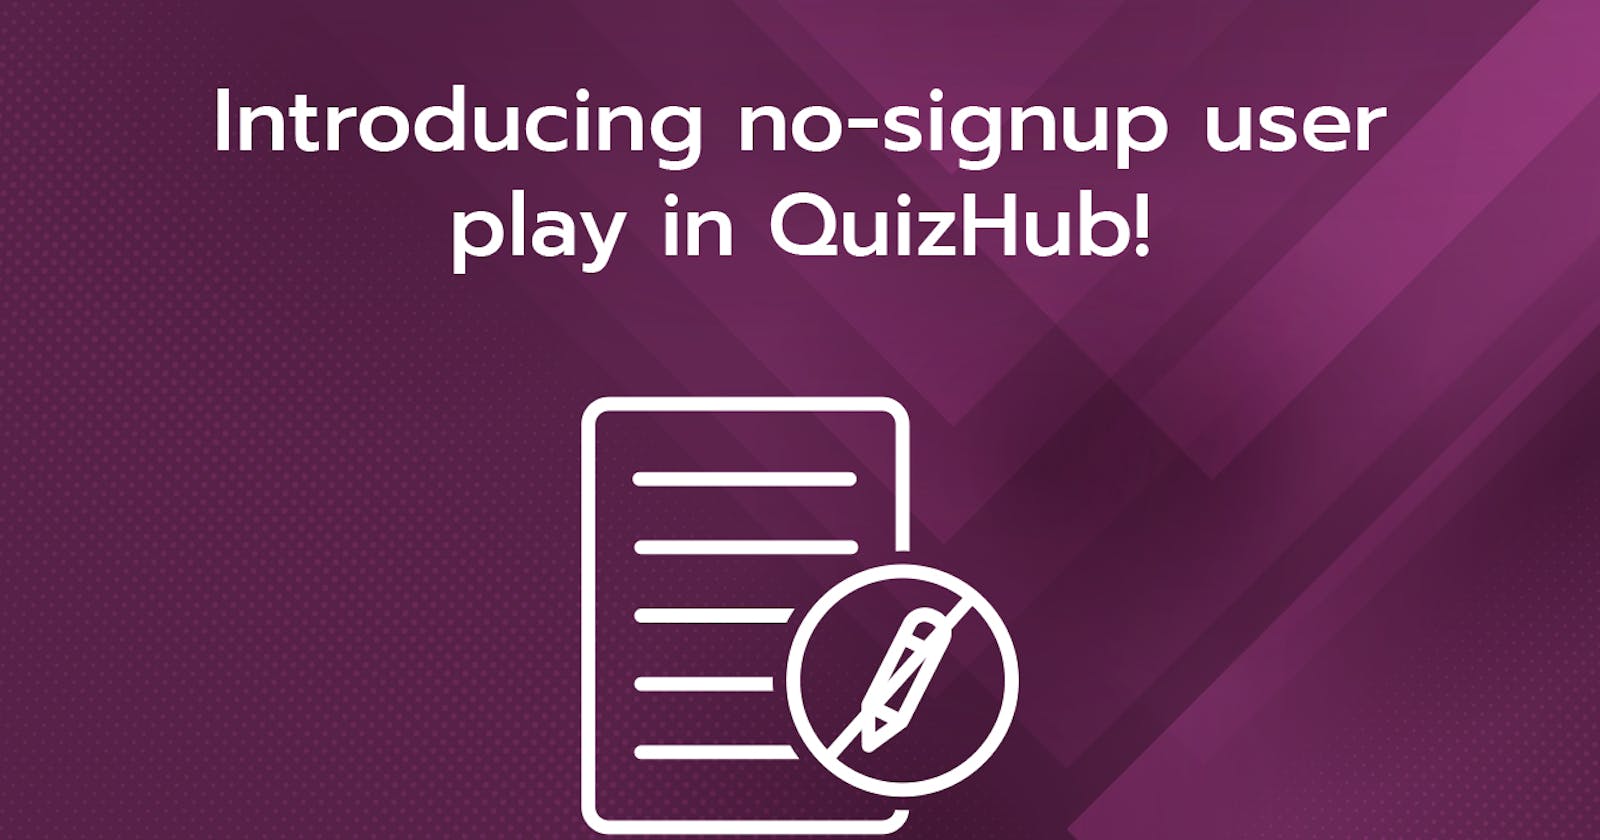 Introducing no-signup user play in QuizHub!